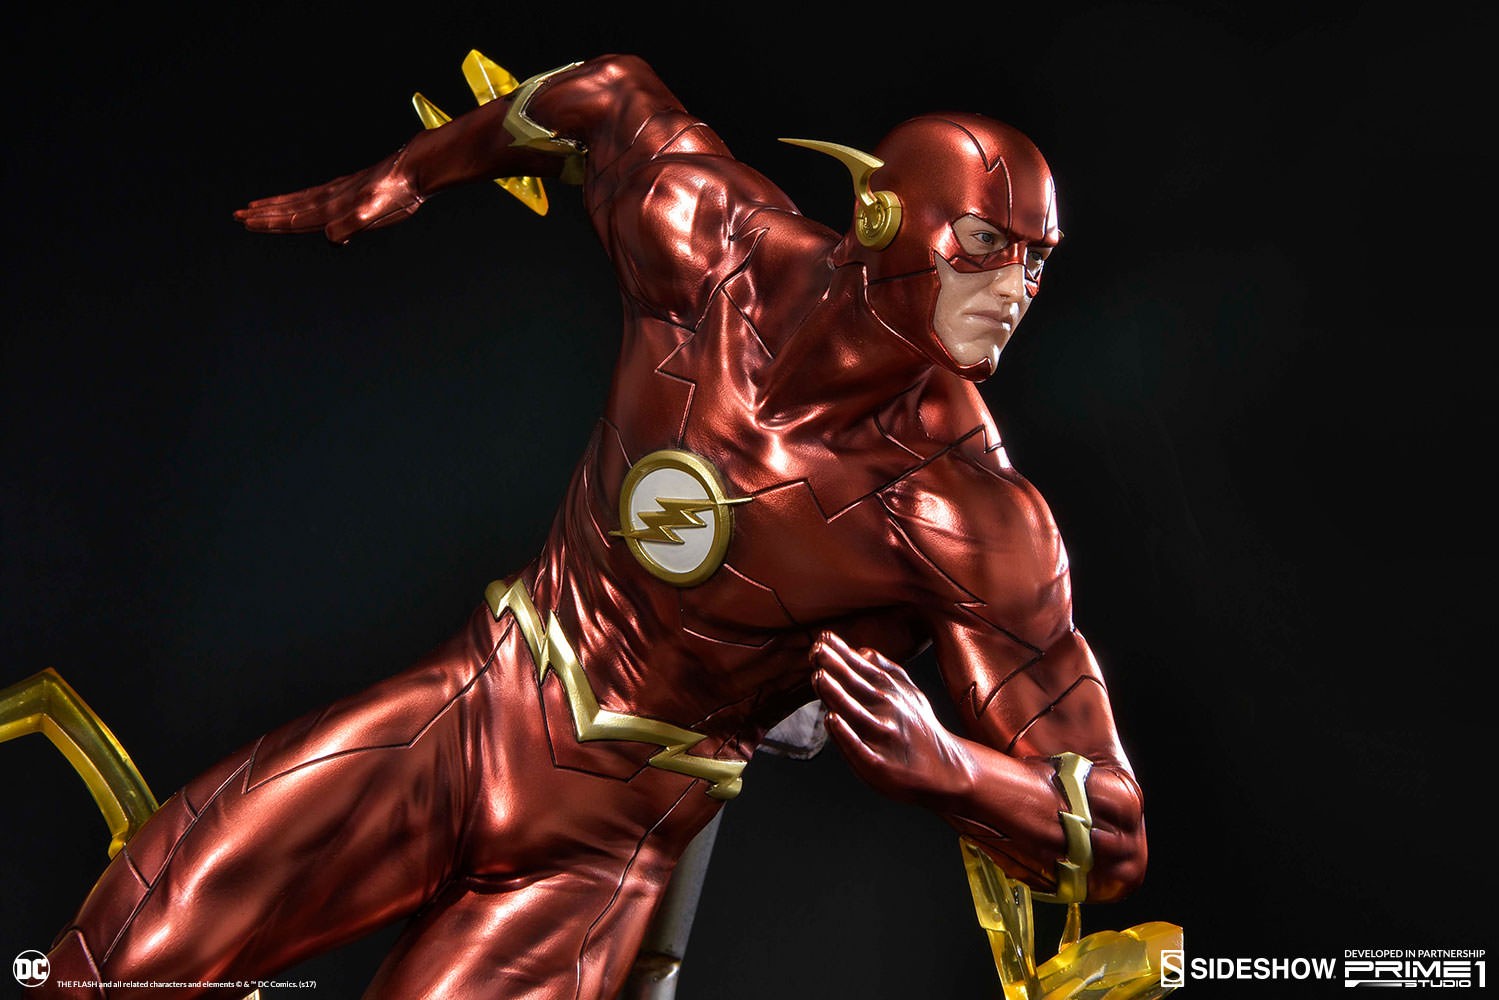 The Flash Collector Edition (Prototype Shown) View 3